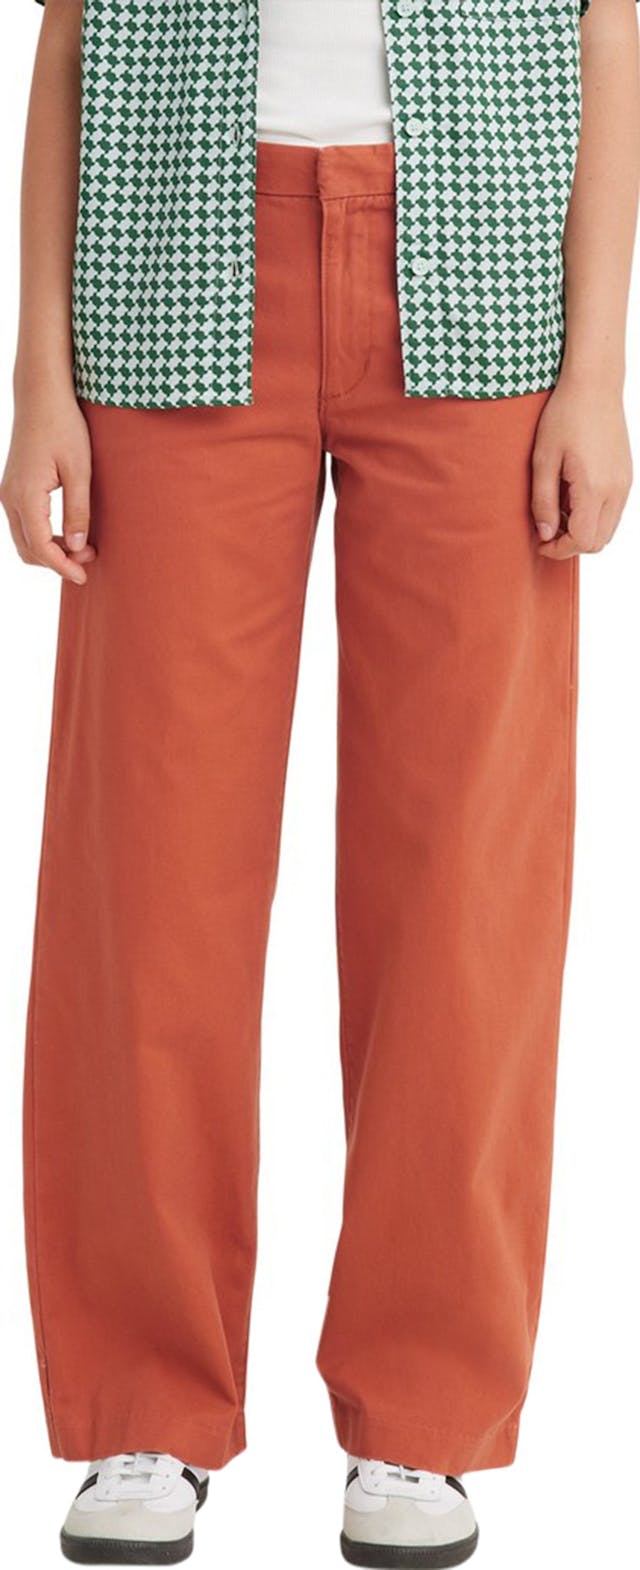 Product image for Baggy Trousers - Women's